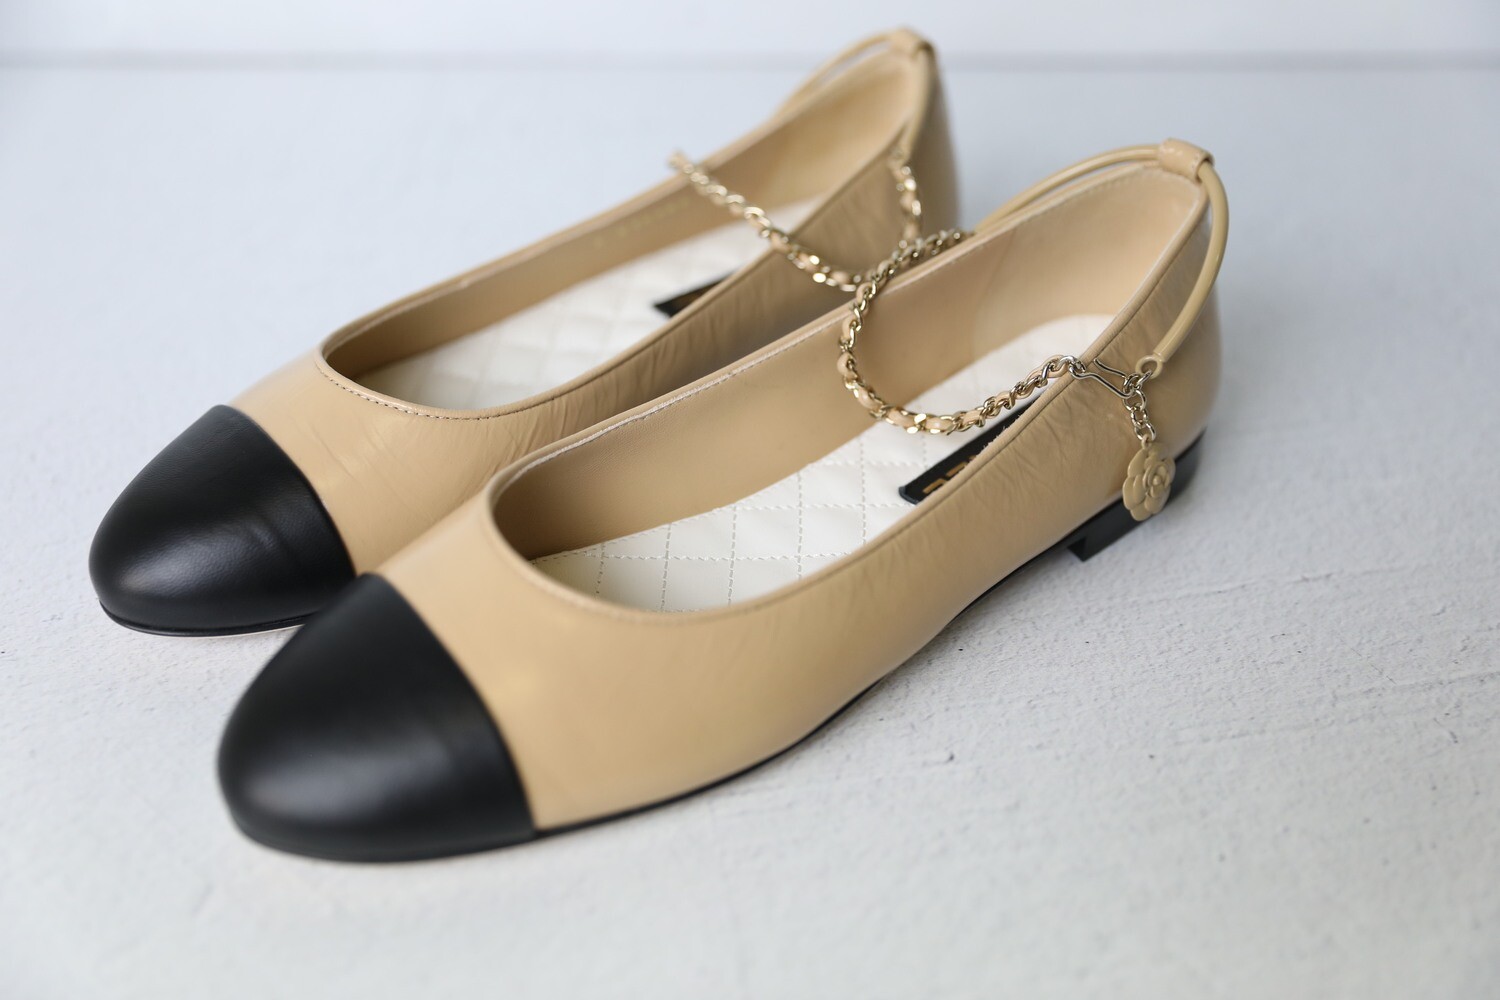 Chanel Ballet Flats with Ankle Strap, Beige and Black, Size 41, As New in  Box WA001